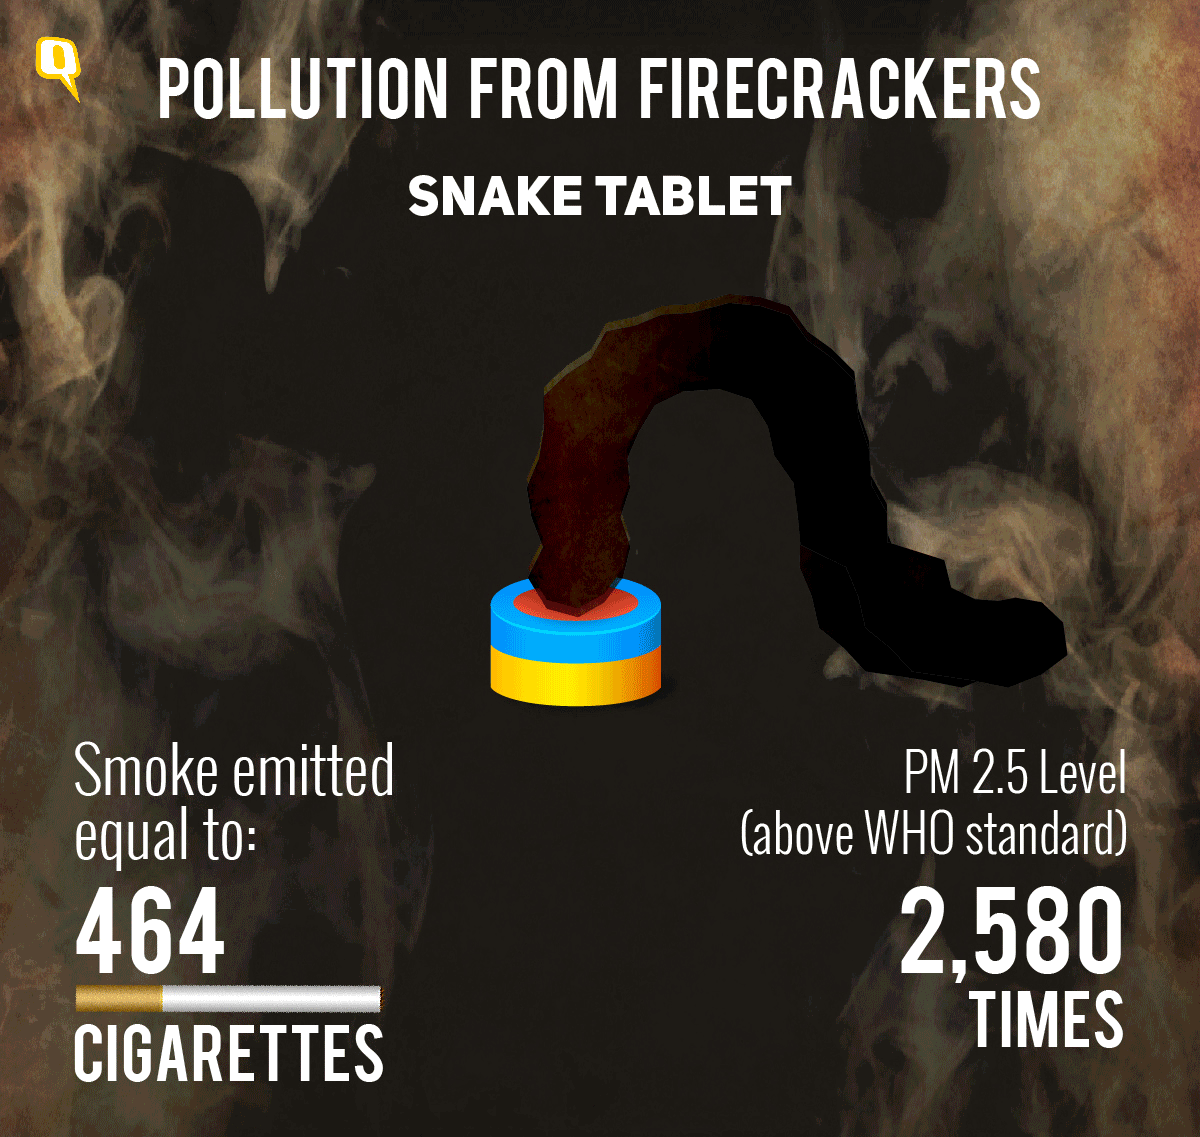 

They’re not a necessity, so let’s not be comfortable with firecrackers harming us this way. #PatakhaHayeHaye